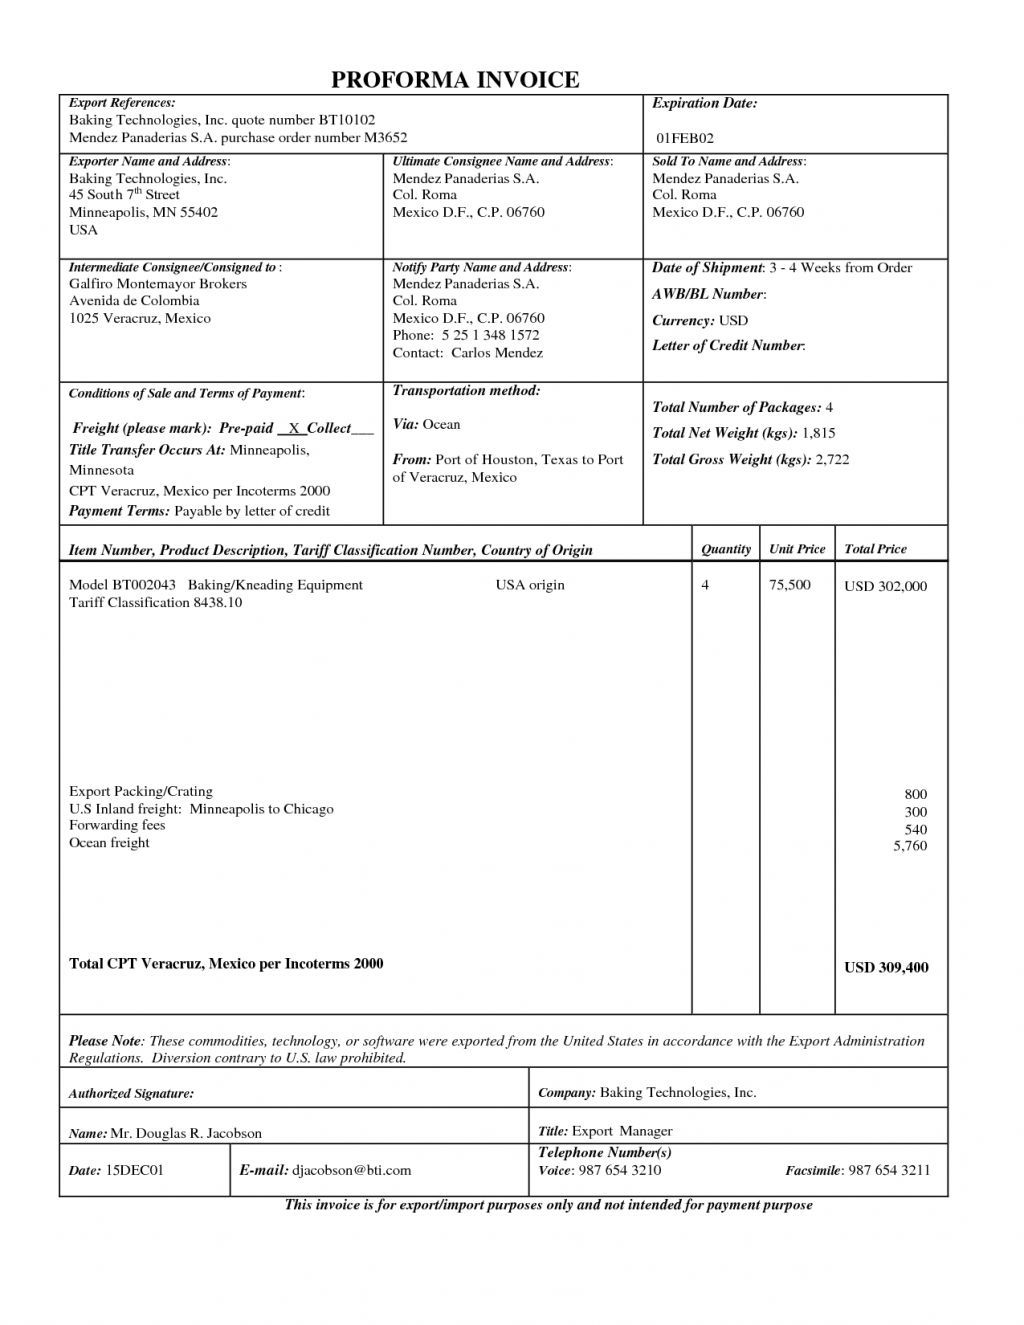 A Picture Of Invoice Proforma For An Exporting Company